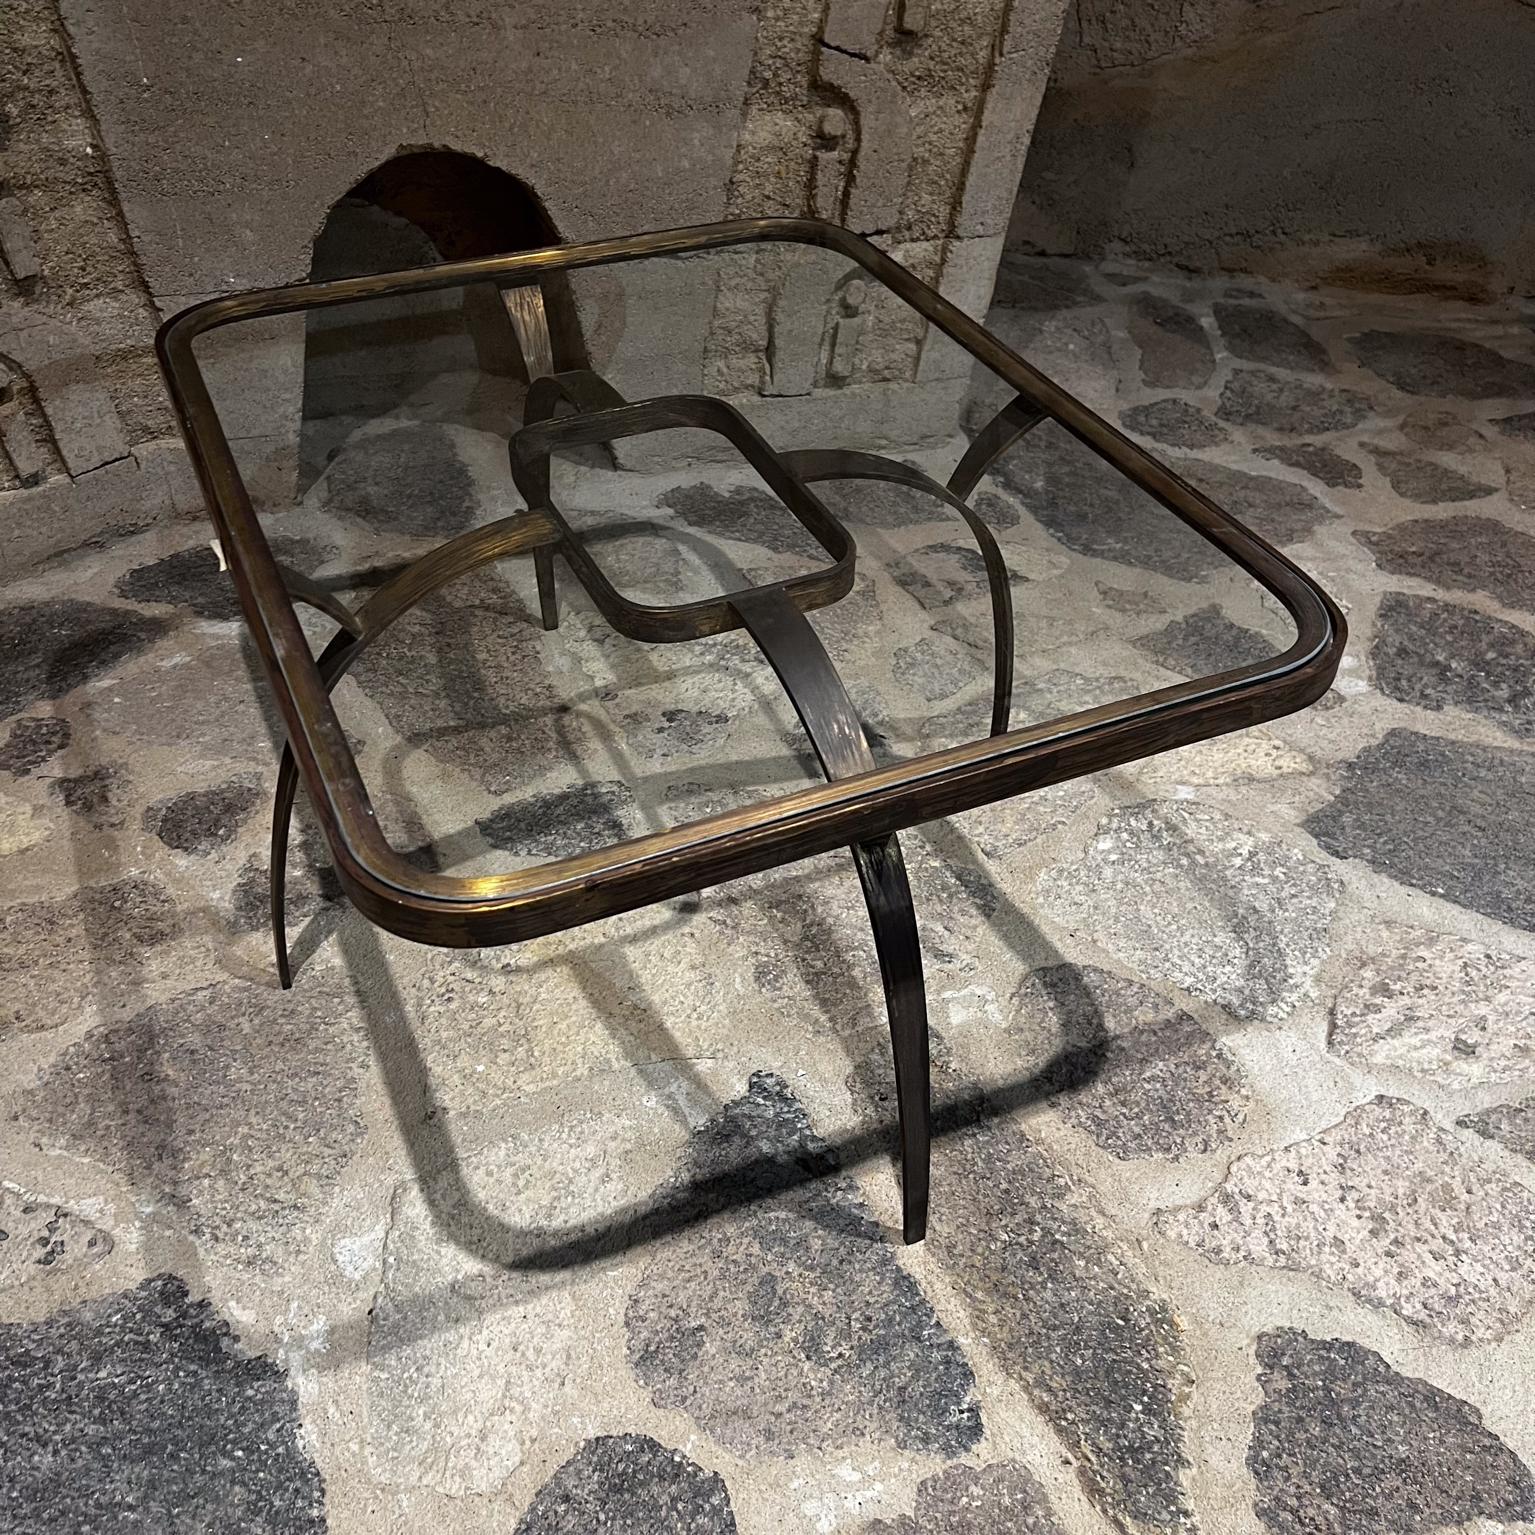 1950s Sculptural Bronze Coffee Side Table Arturo Pani Mexico City For Sale 3